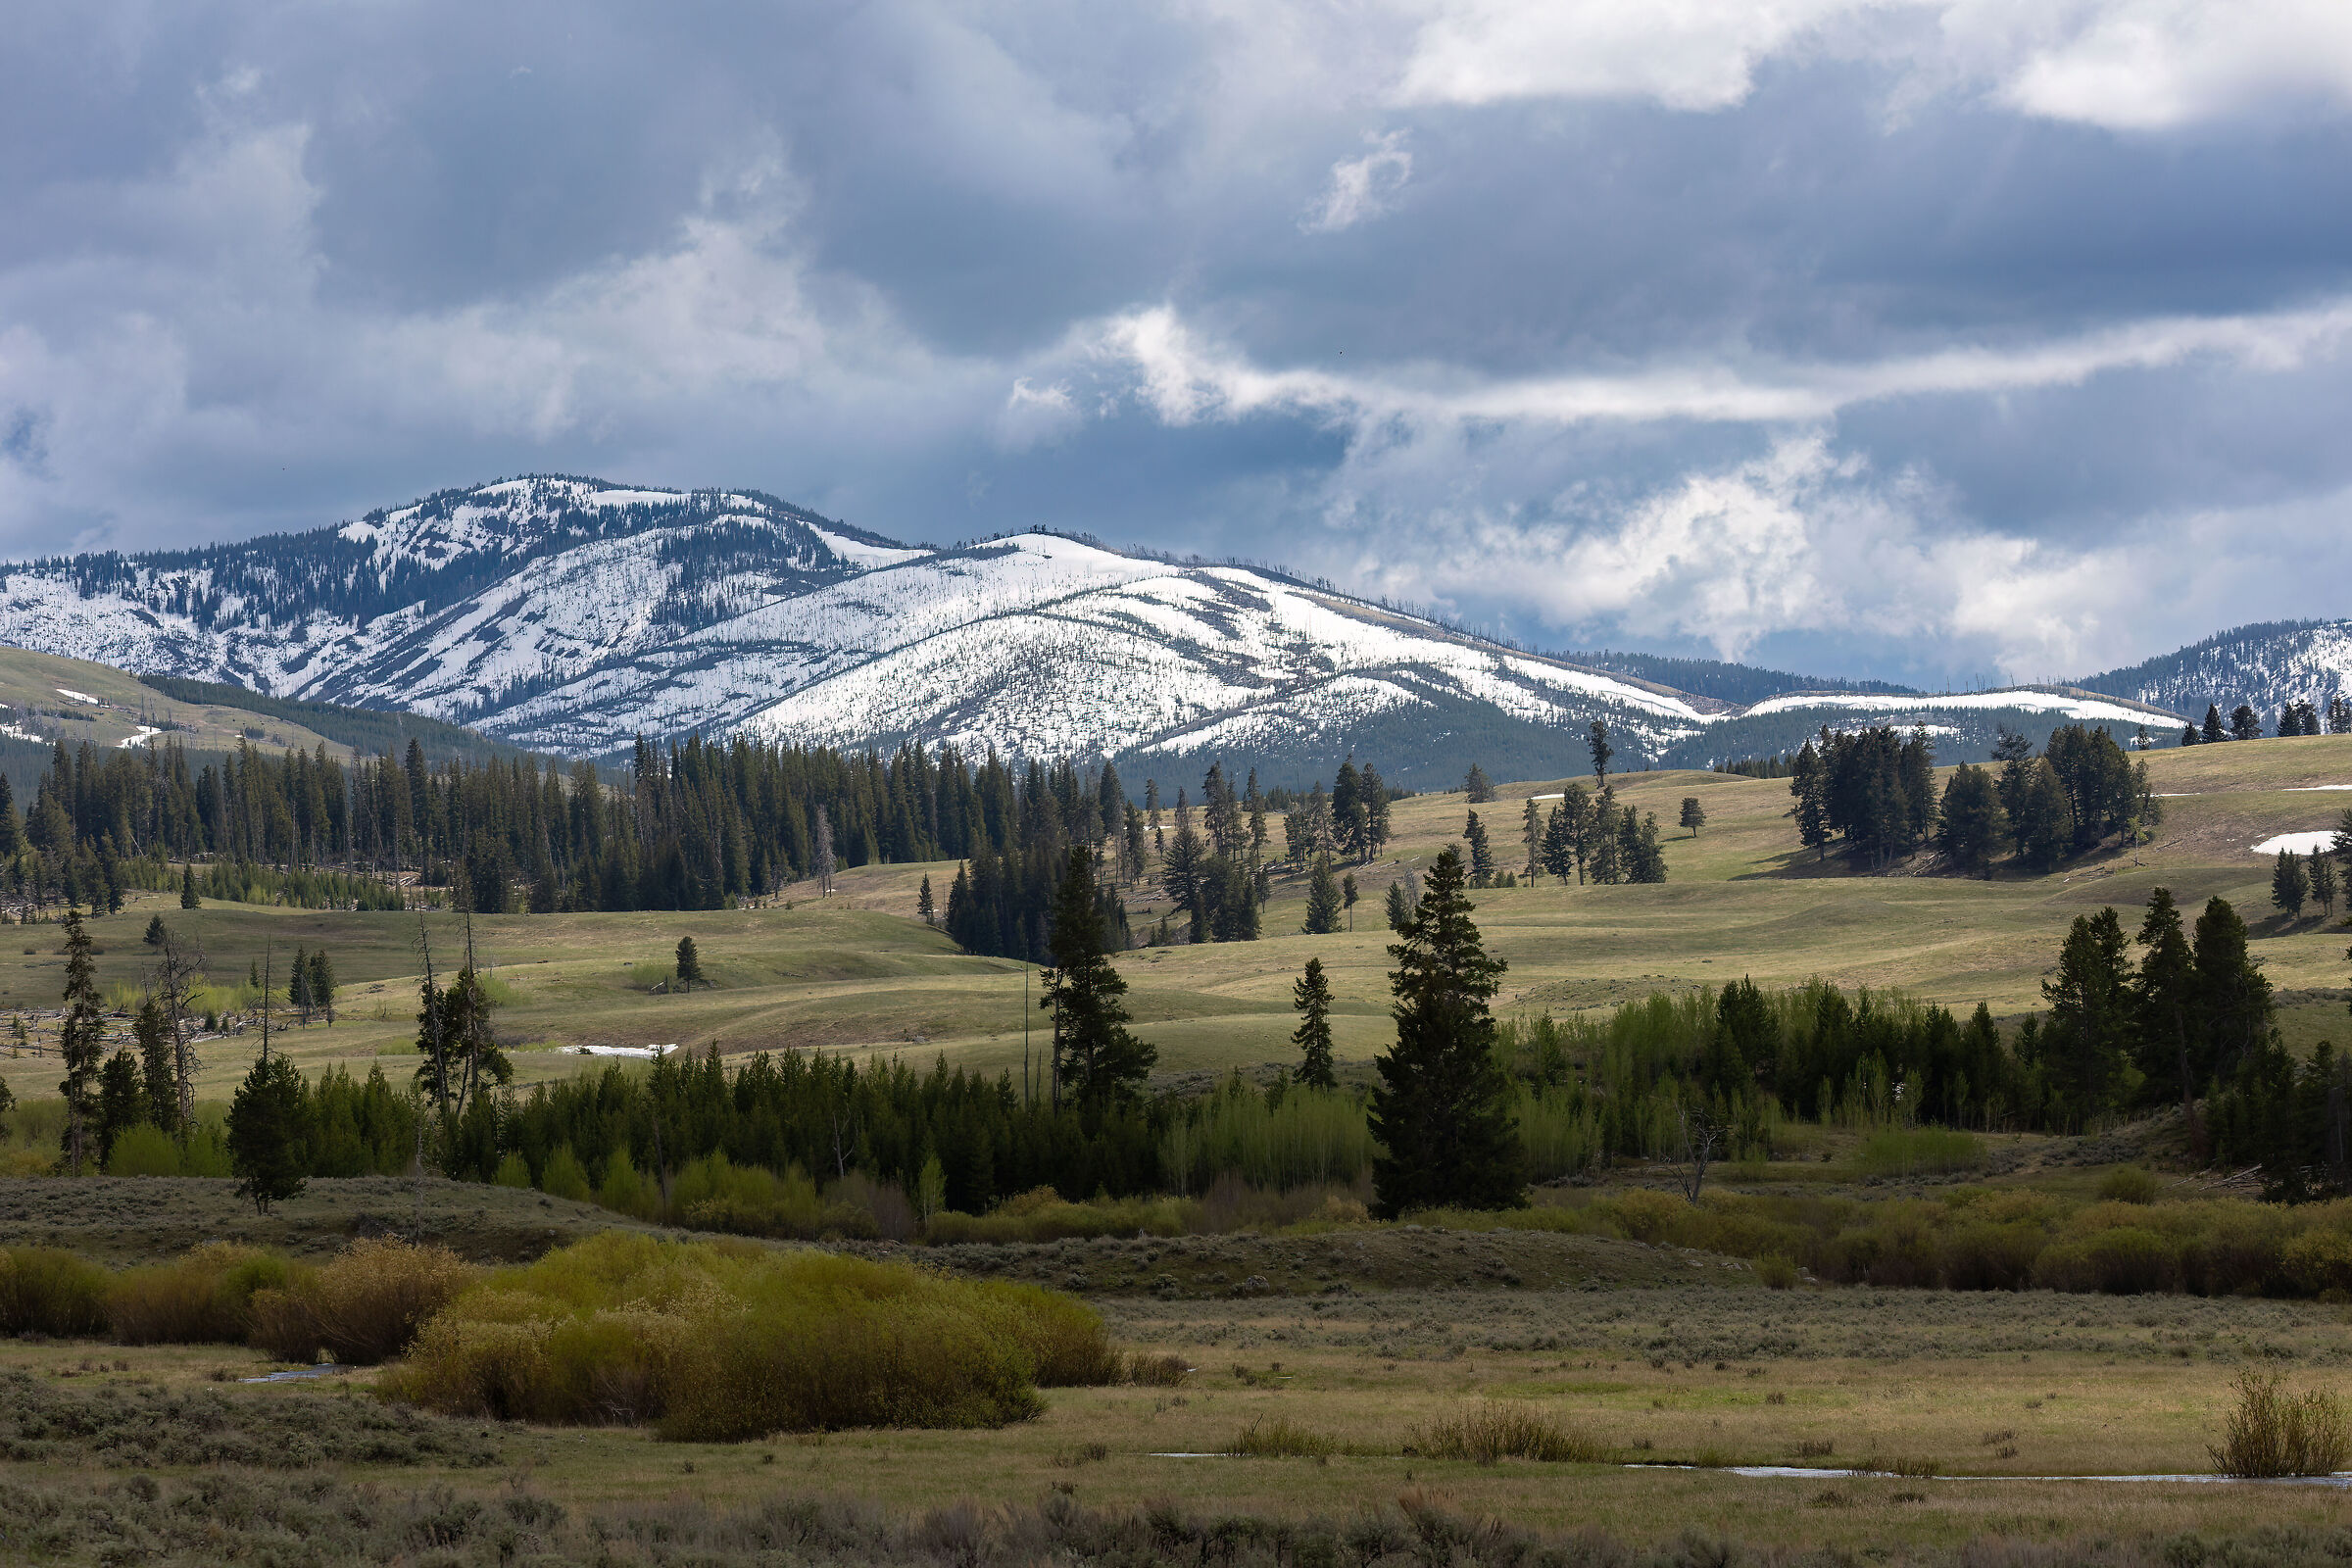 One of the thousand views of Yellowstone...